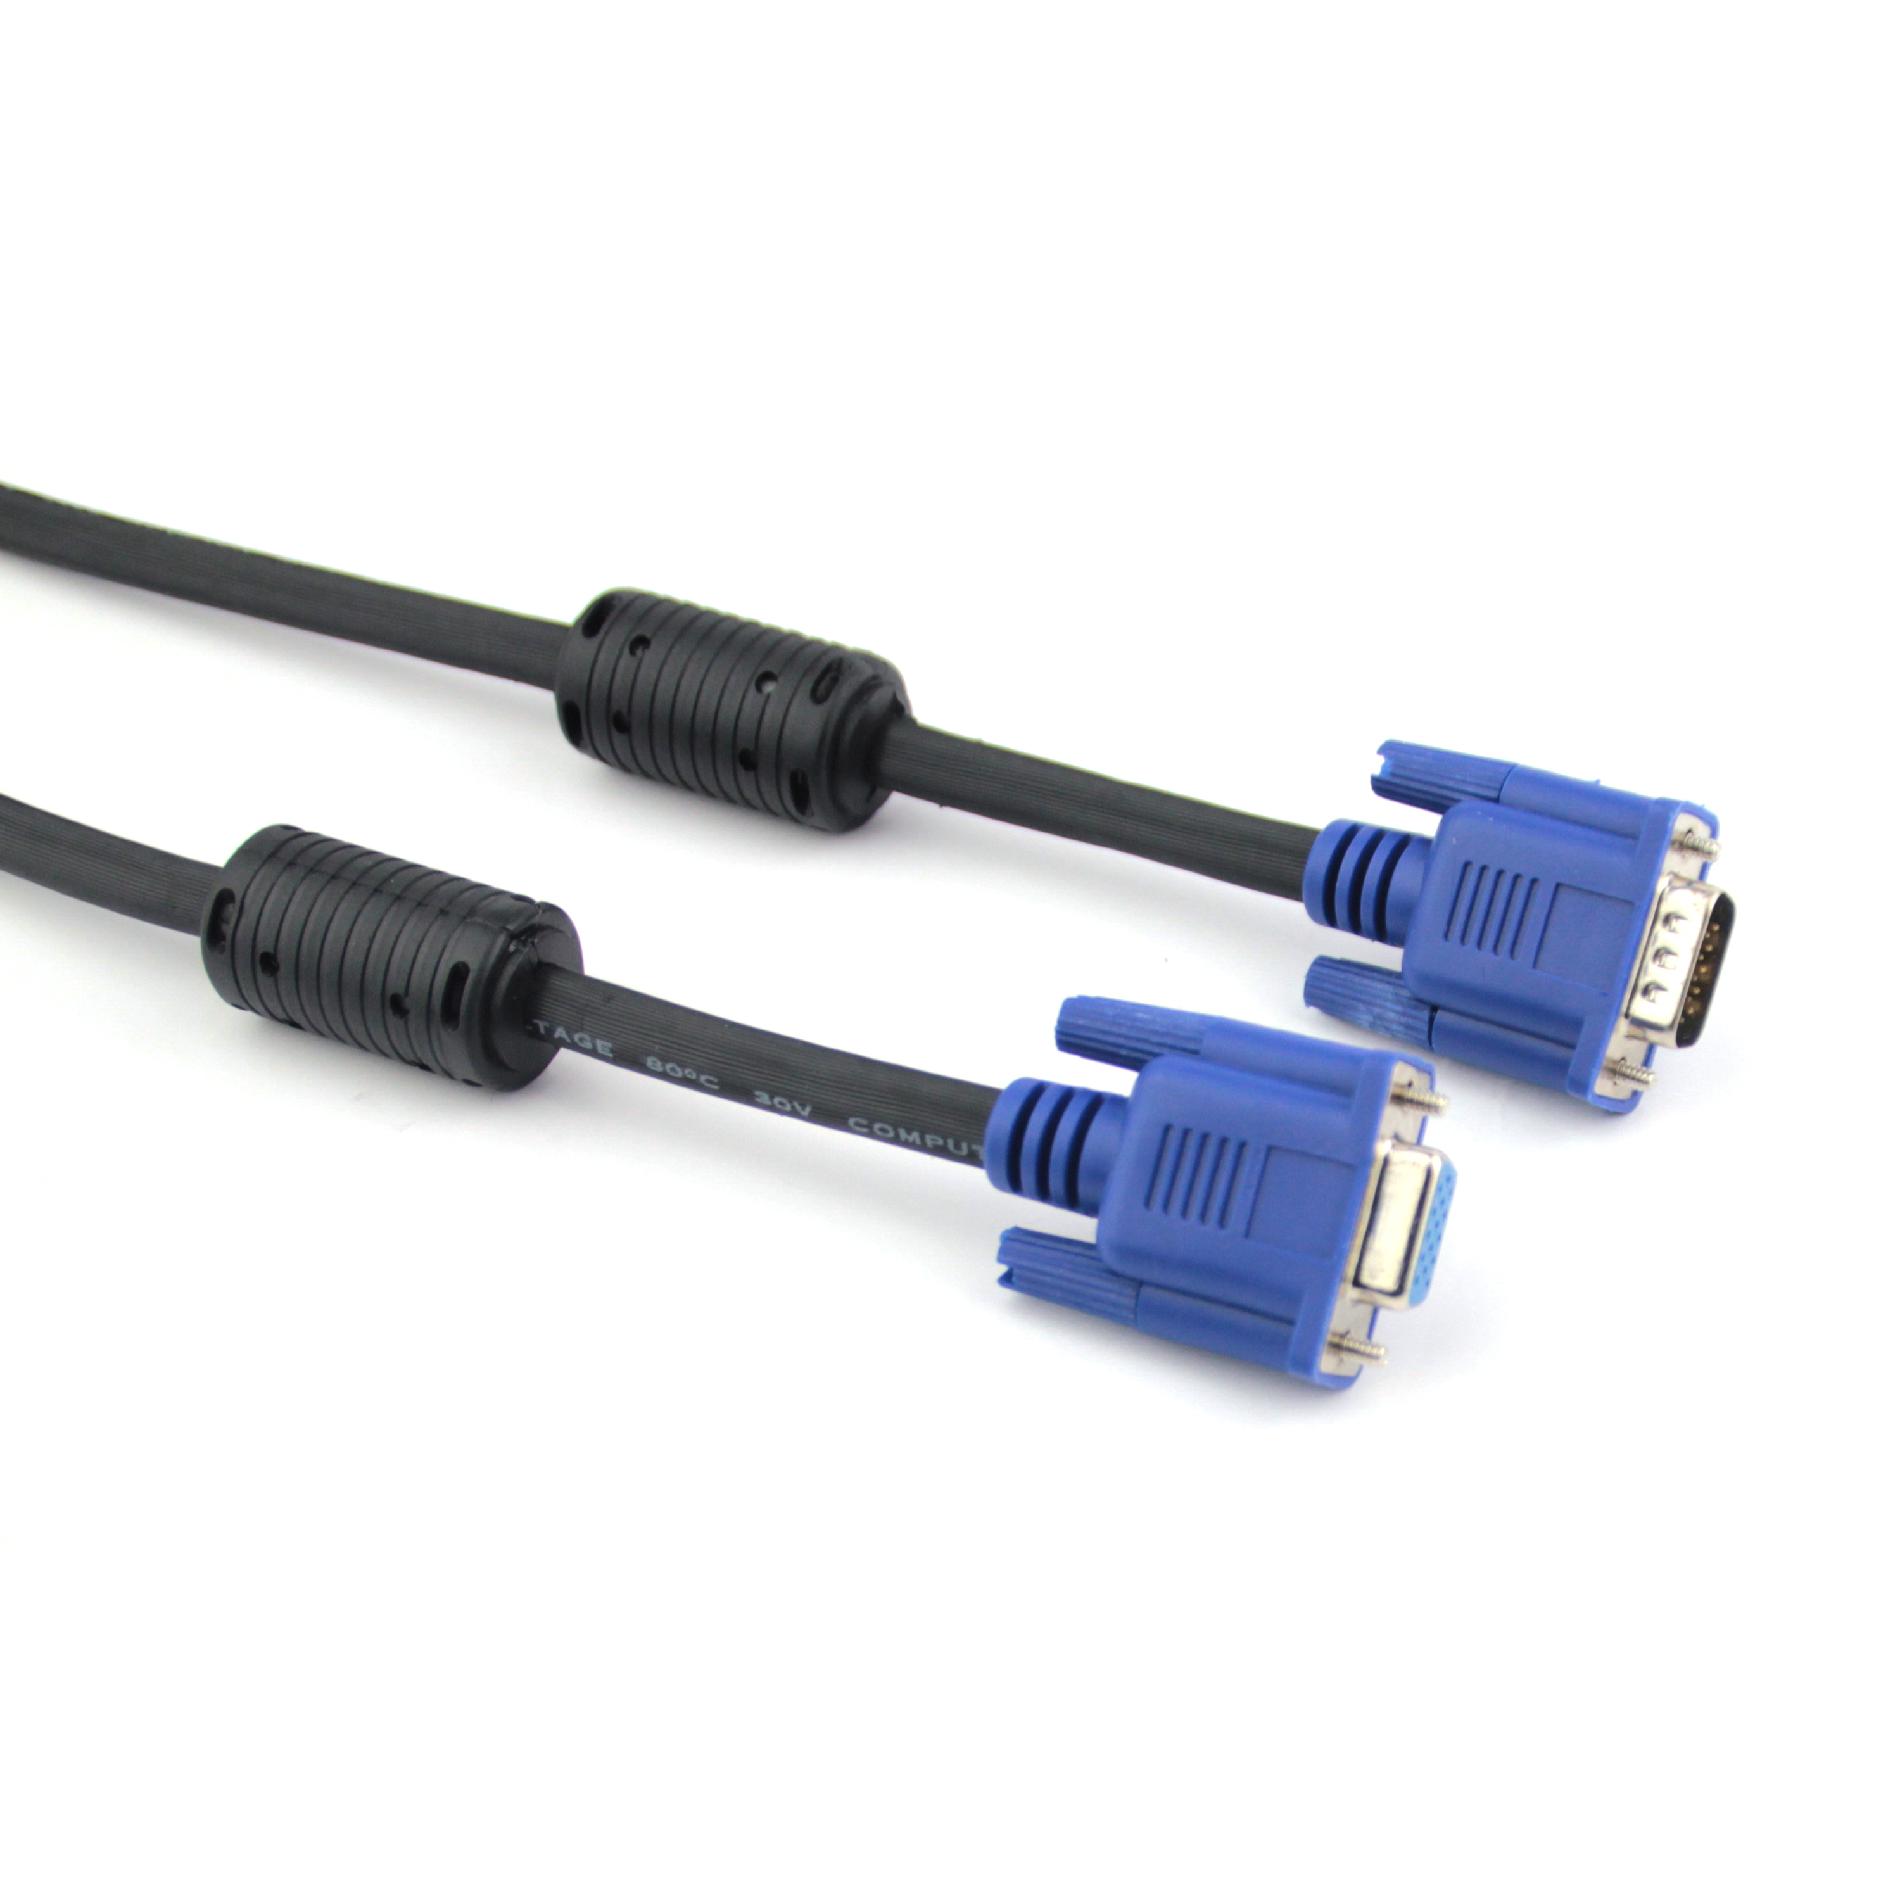 Vcom  VC-VGA15F SVGA HD15 Male to Female Black Cable with  Blue Connector  Gold Plated  15feet